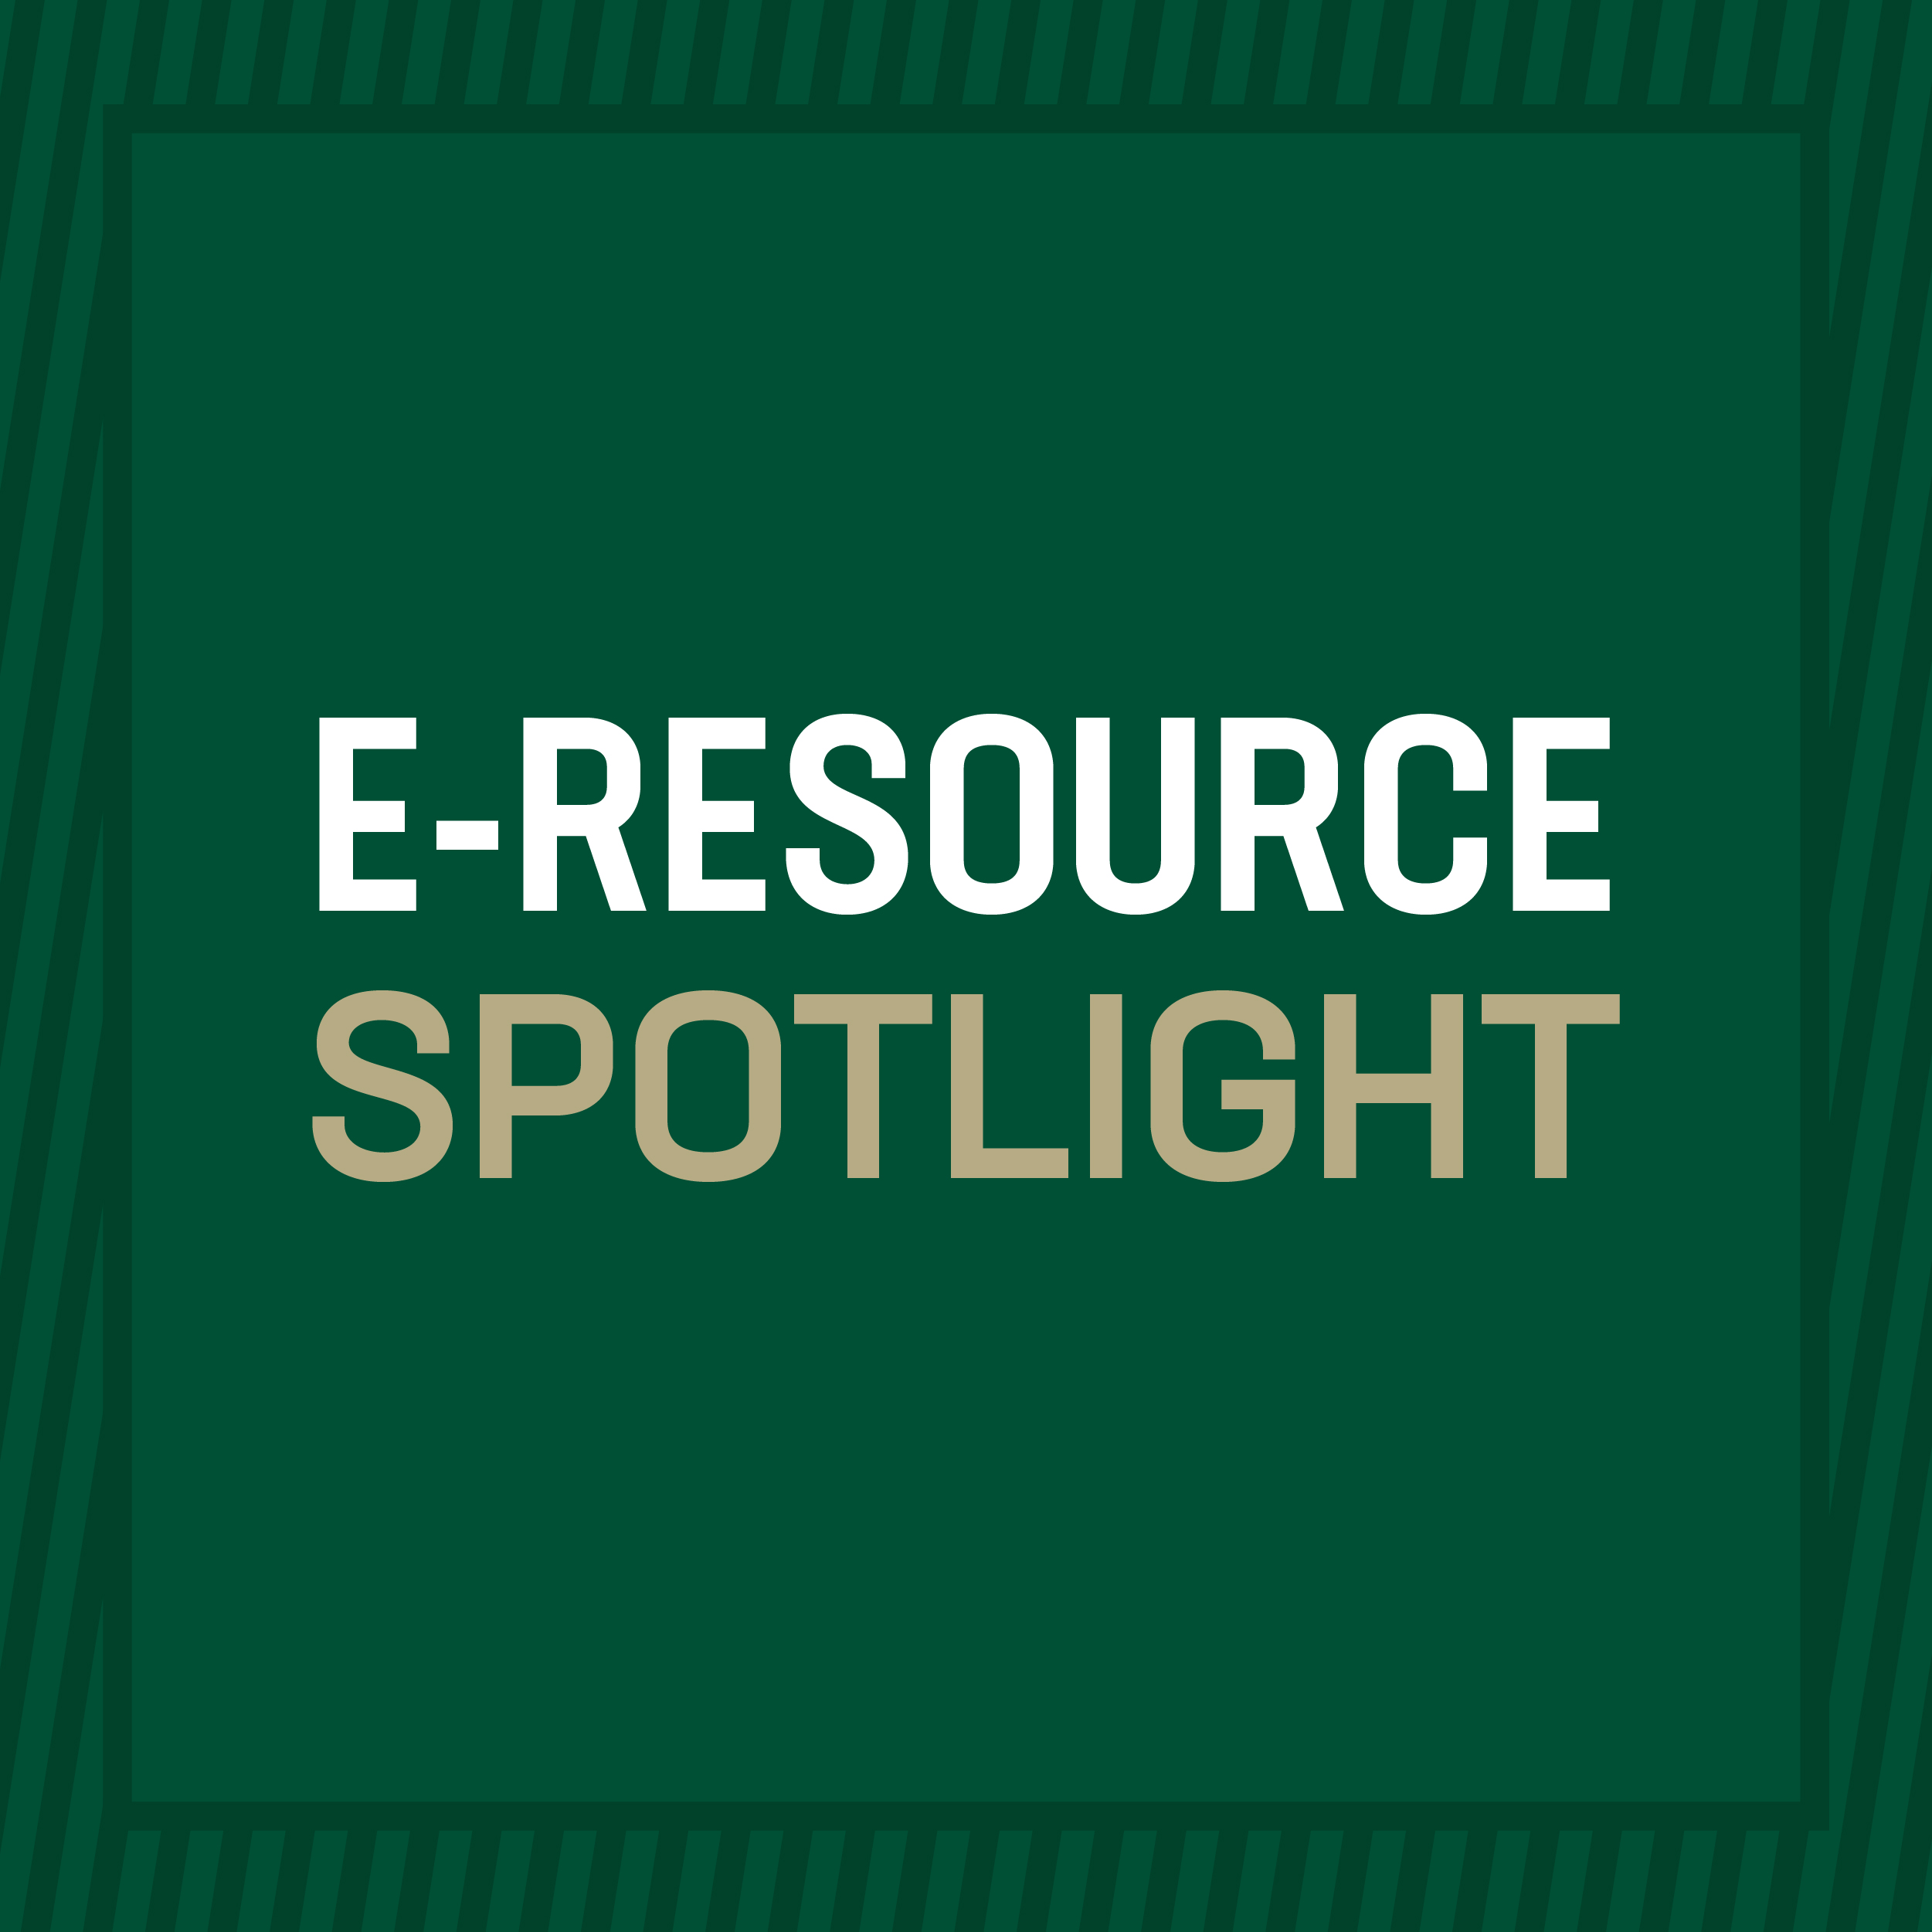 A graphic that reads E-Resource Spotlight